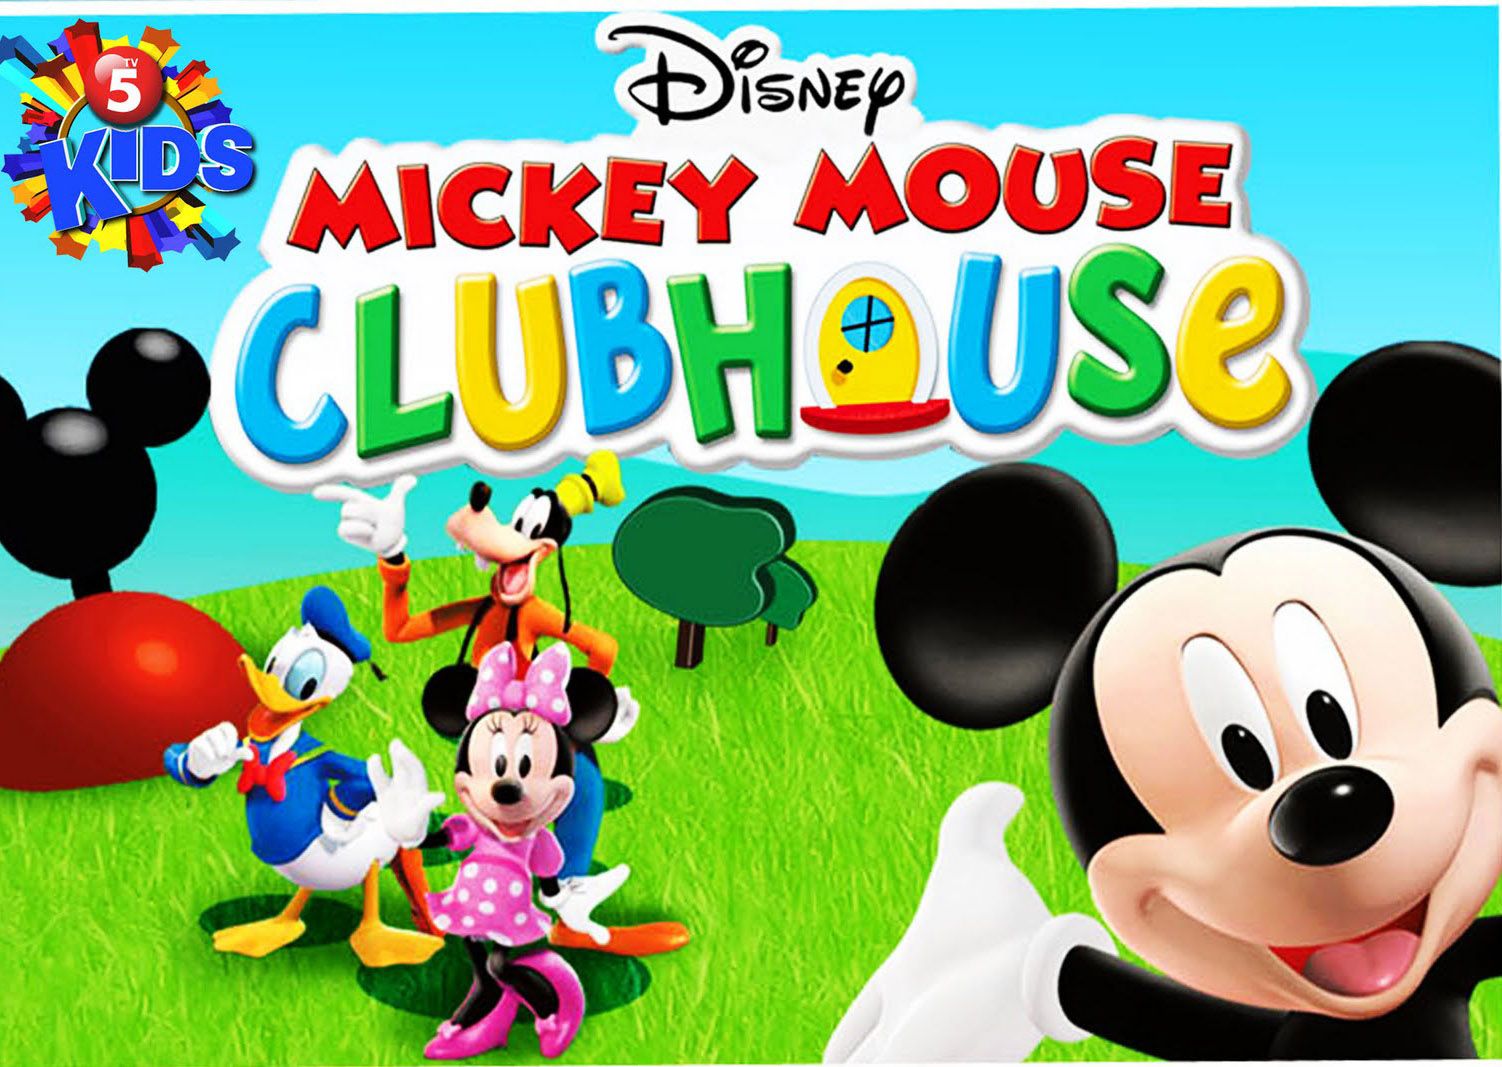 Mickey Mouse Clubhouse Wallpapers on WallpaperDog